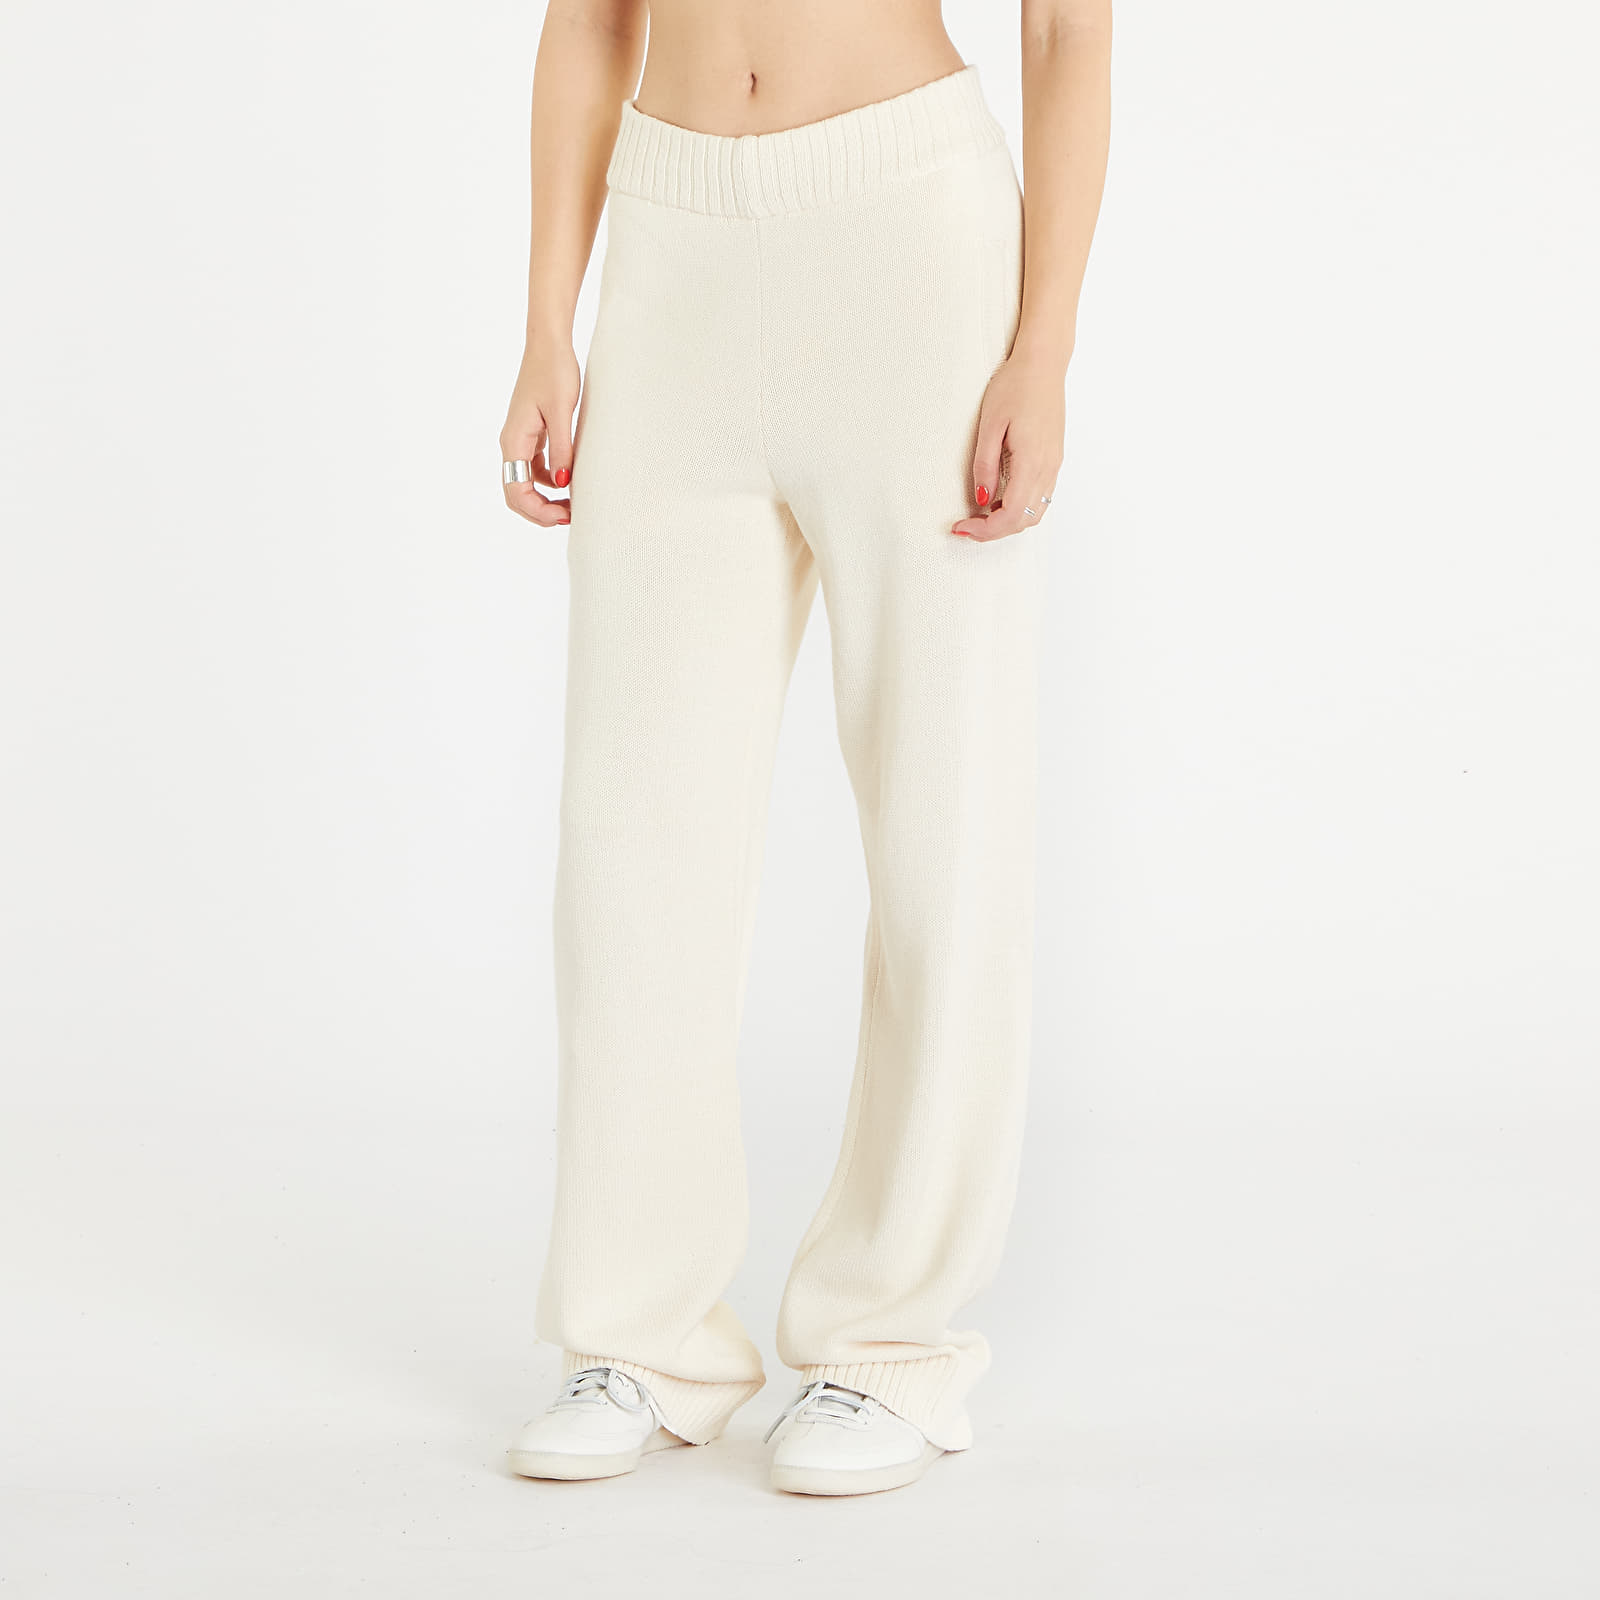 Pants and jeans adidas Originals Women's Premium Essentials Knit Relaxed Pants Wonder White